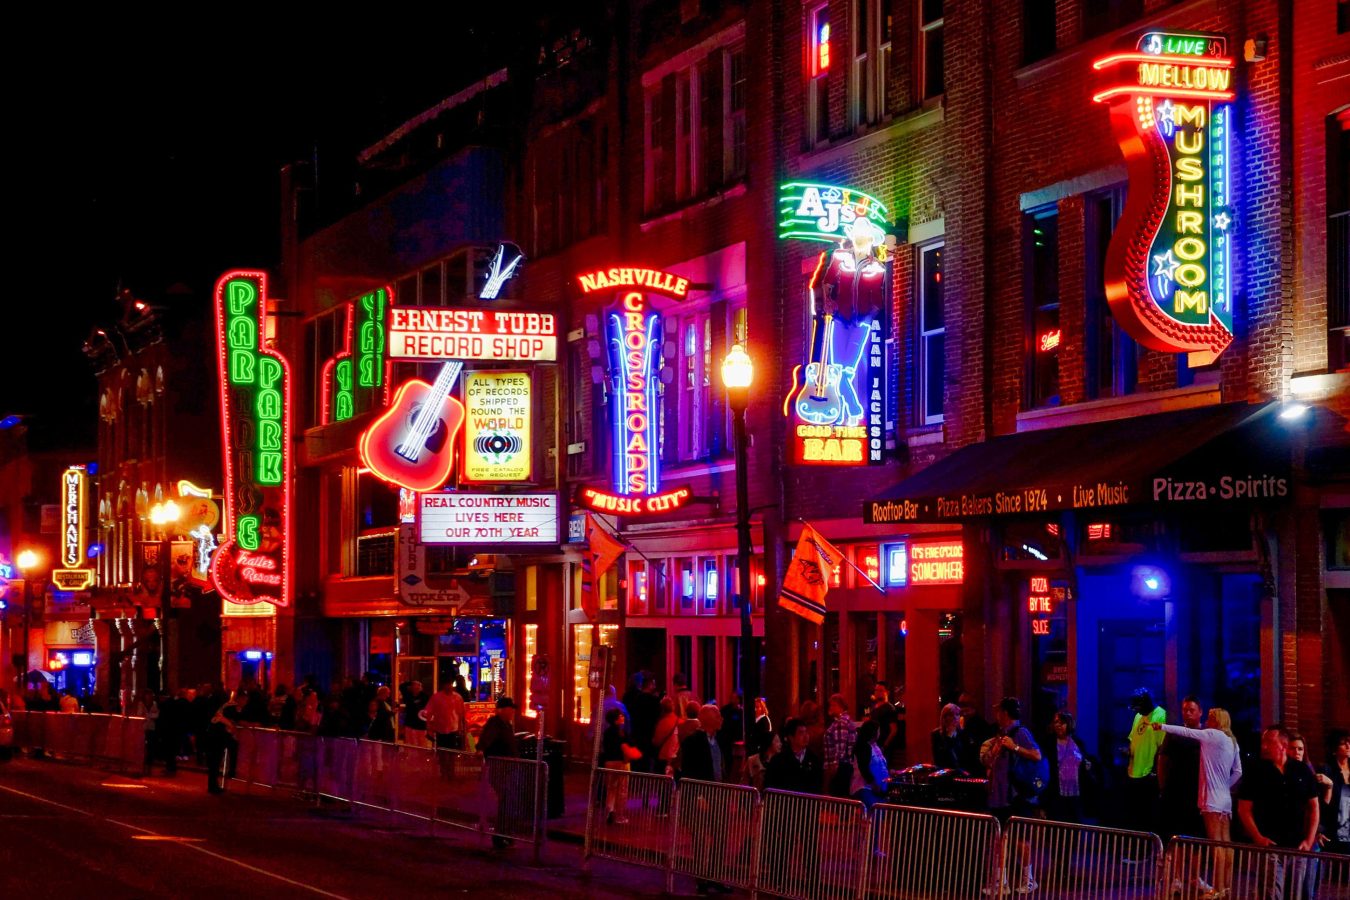 Lit up street in Nashville, Tennessee at night.